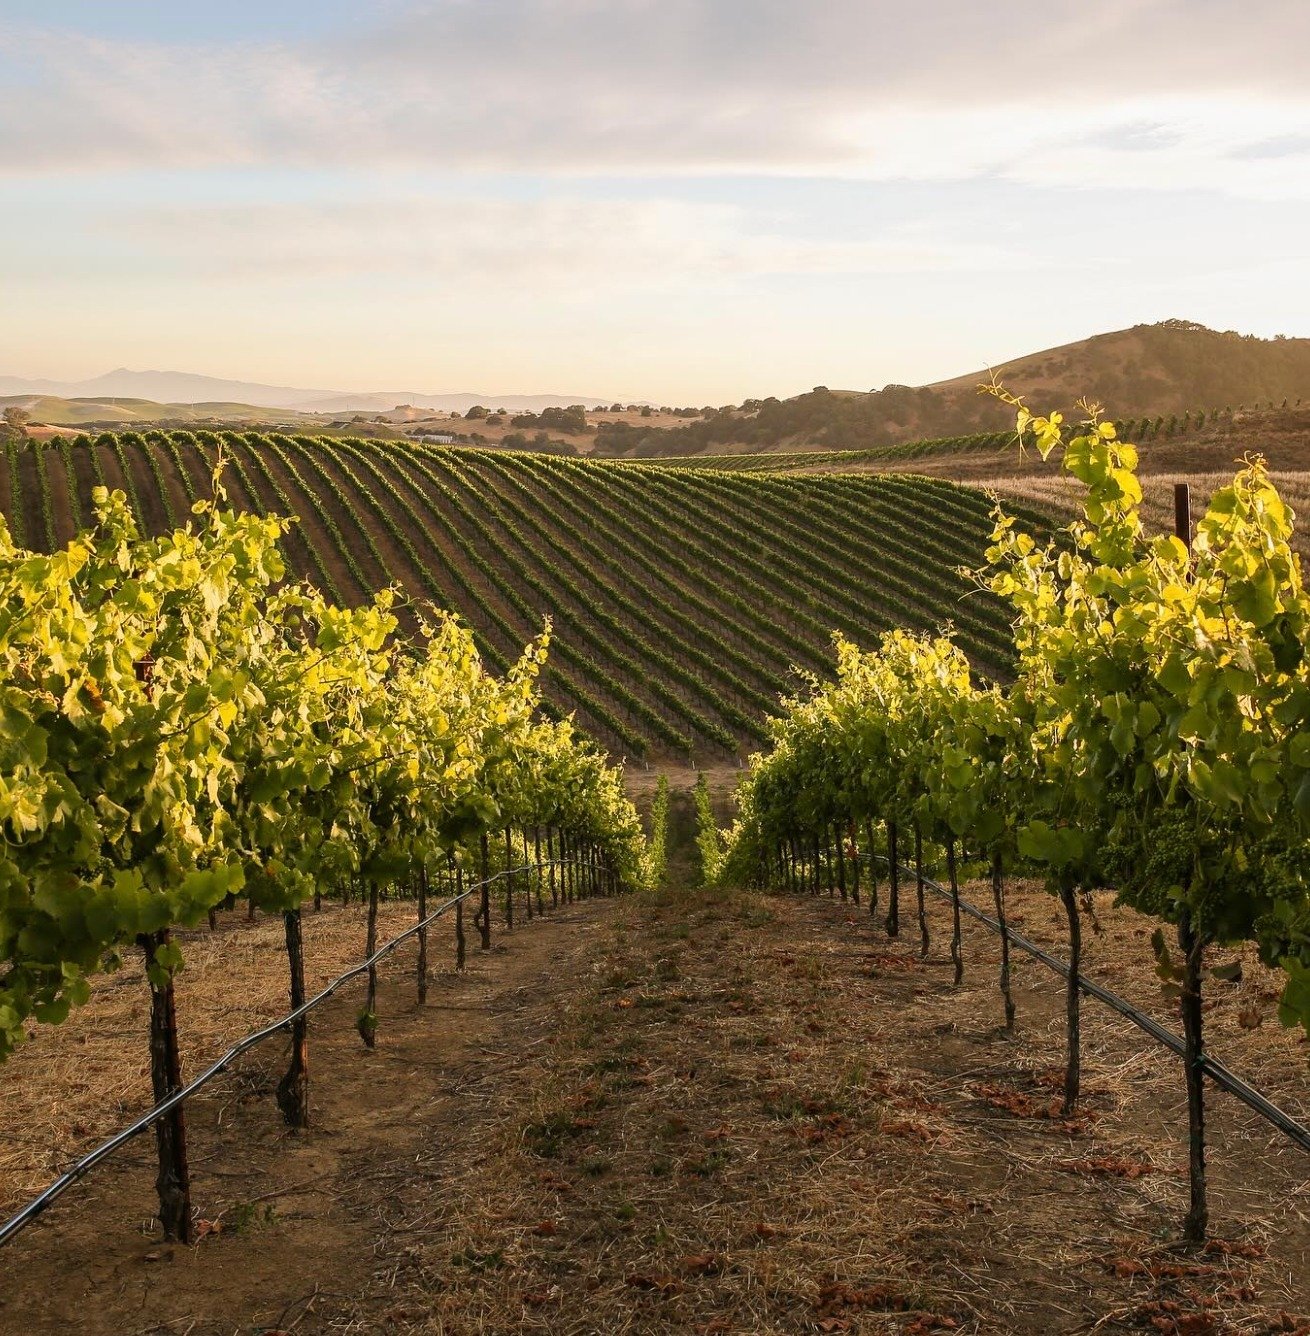 San Pablo Bay&rsquo;s strategic location provides a cool, maritime climate ideal for growing Pinot Noir and Chardonnay 🍷⁠
⁠
The 150-acre vineyard at @artesawinery is spread over five distinct ridges, encompassing a diverse range of slopes and soils.